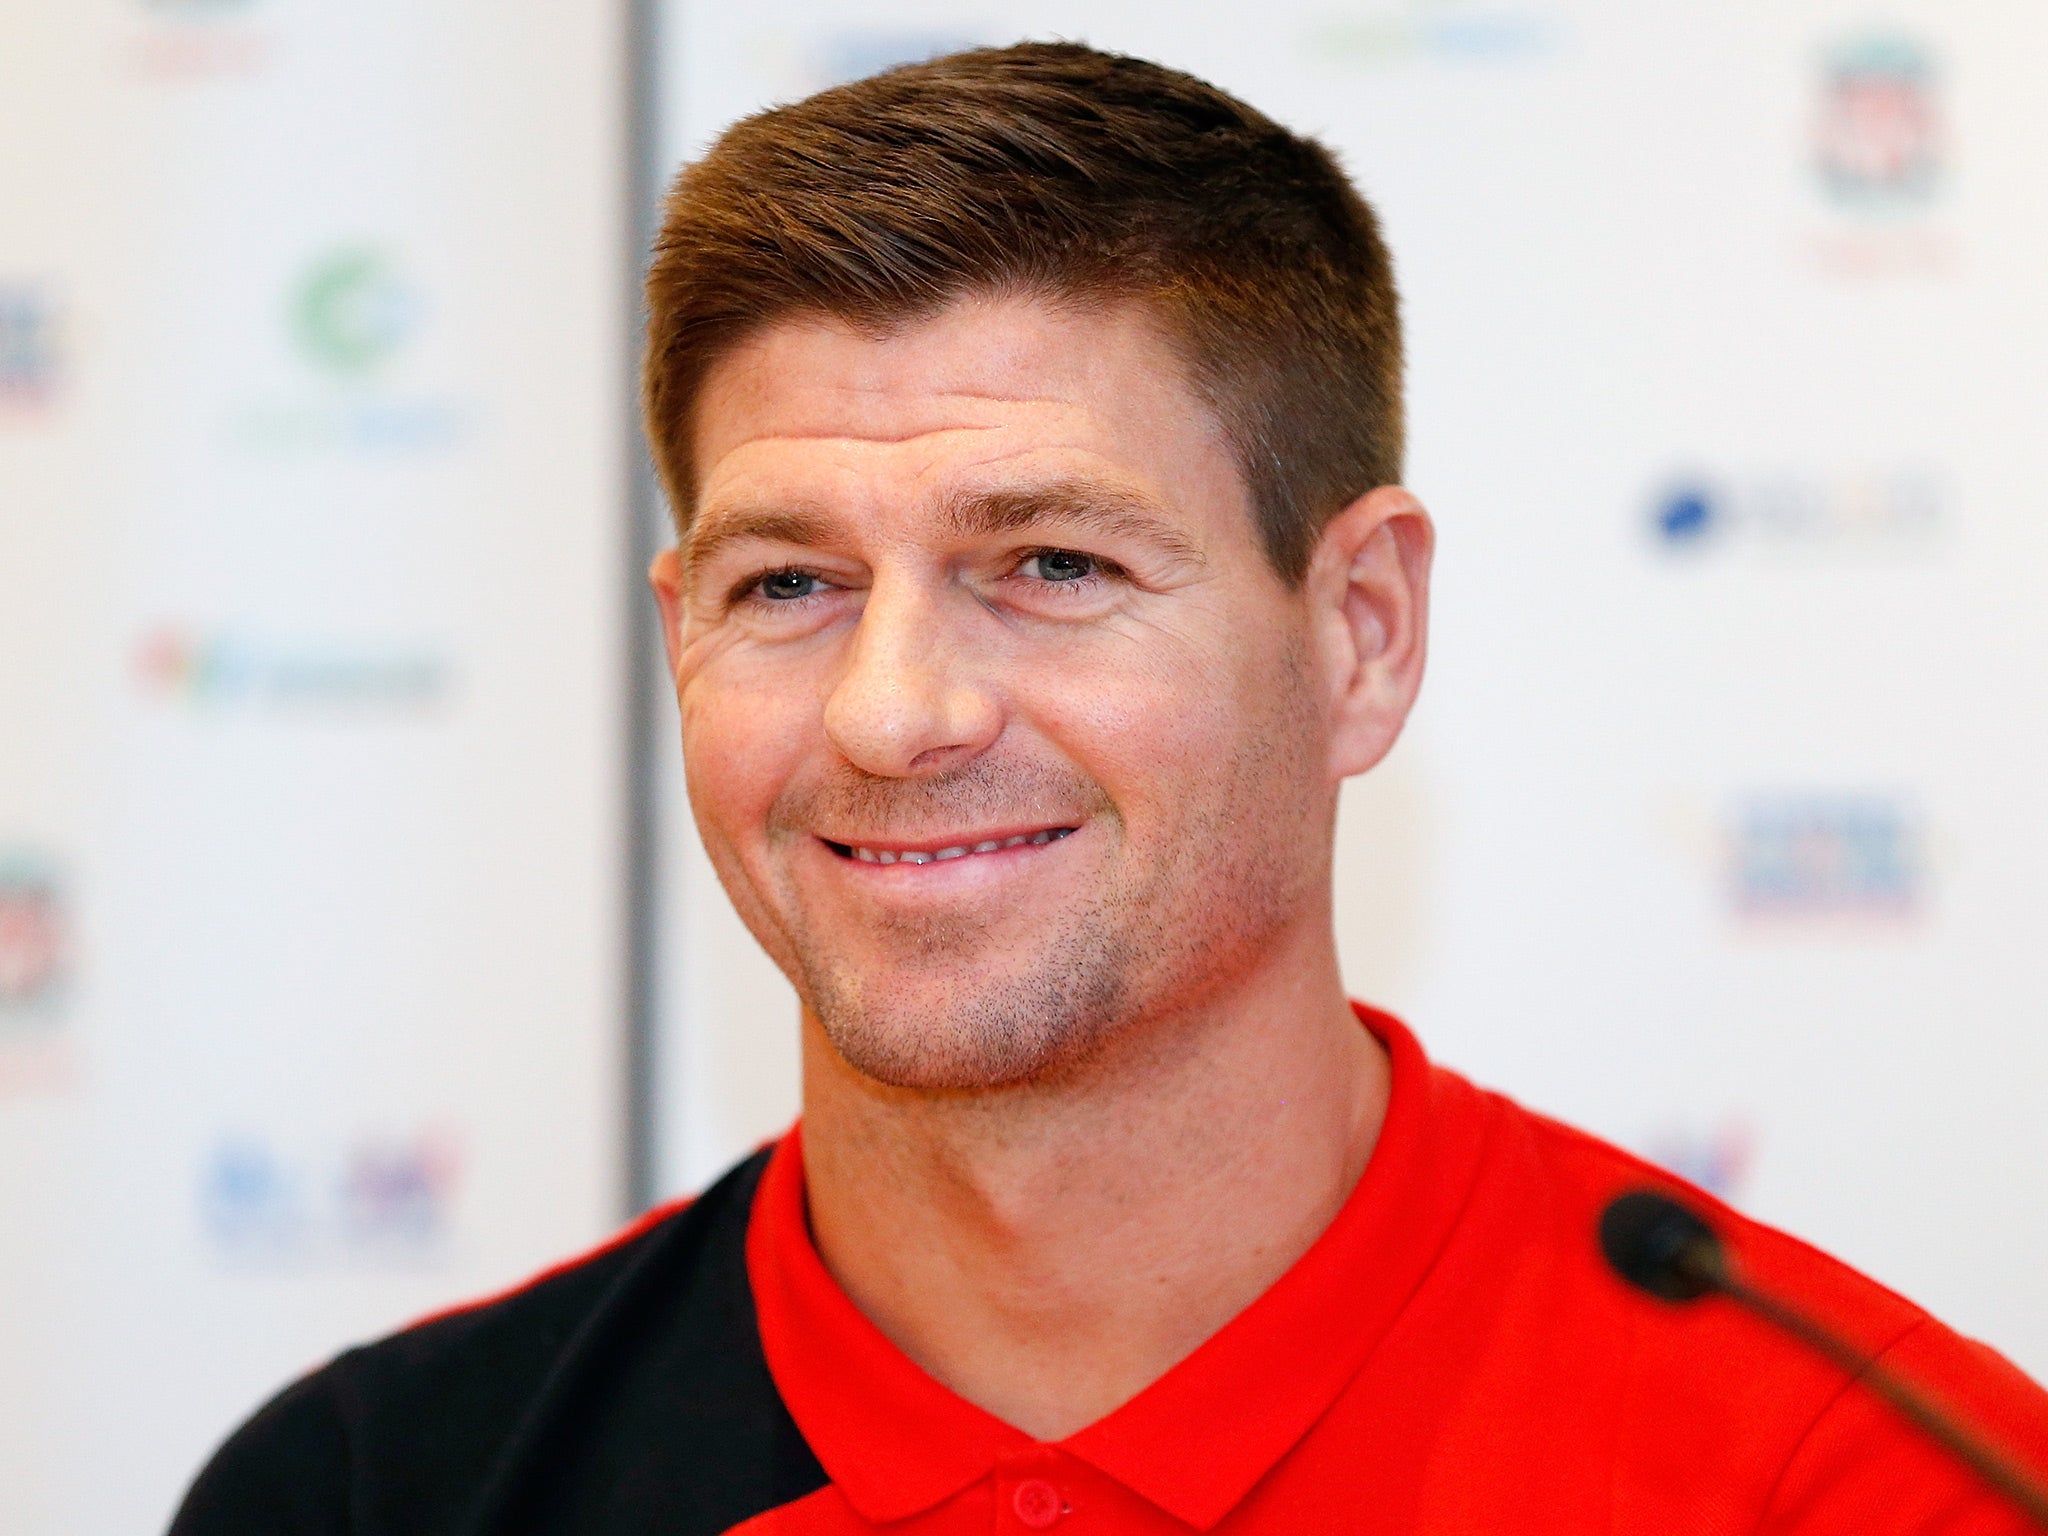 Gerrard spoke with the League One club about replacing Karl Robinson